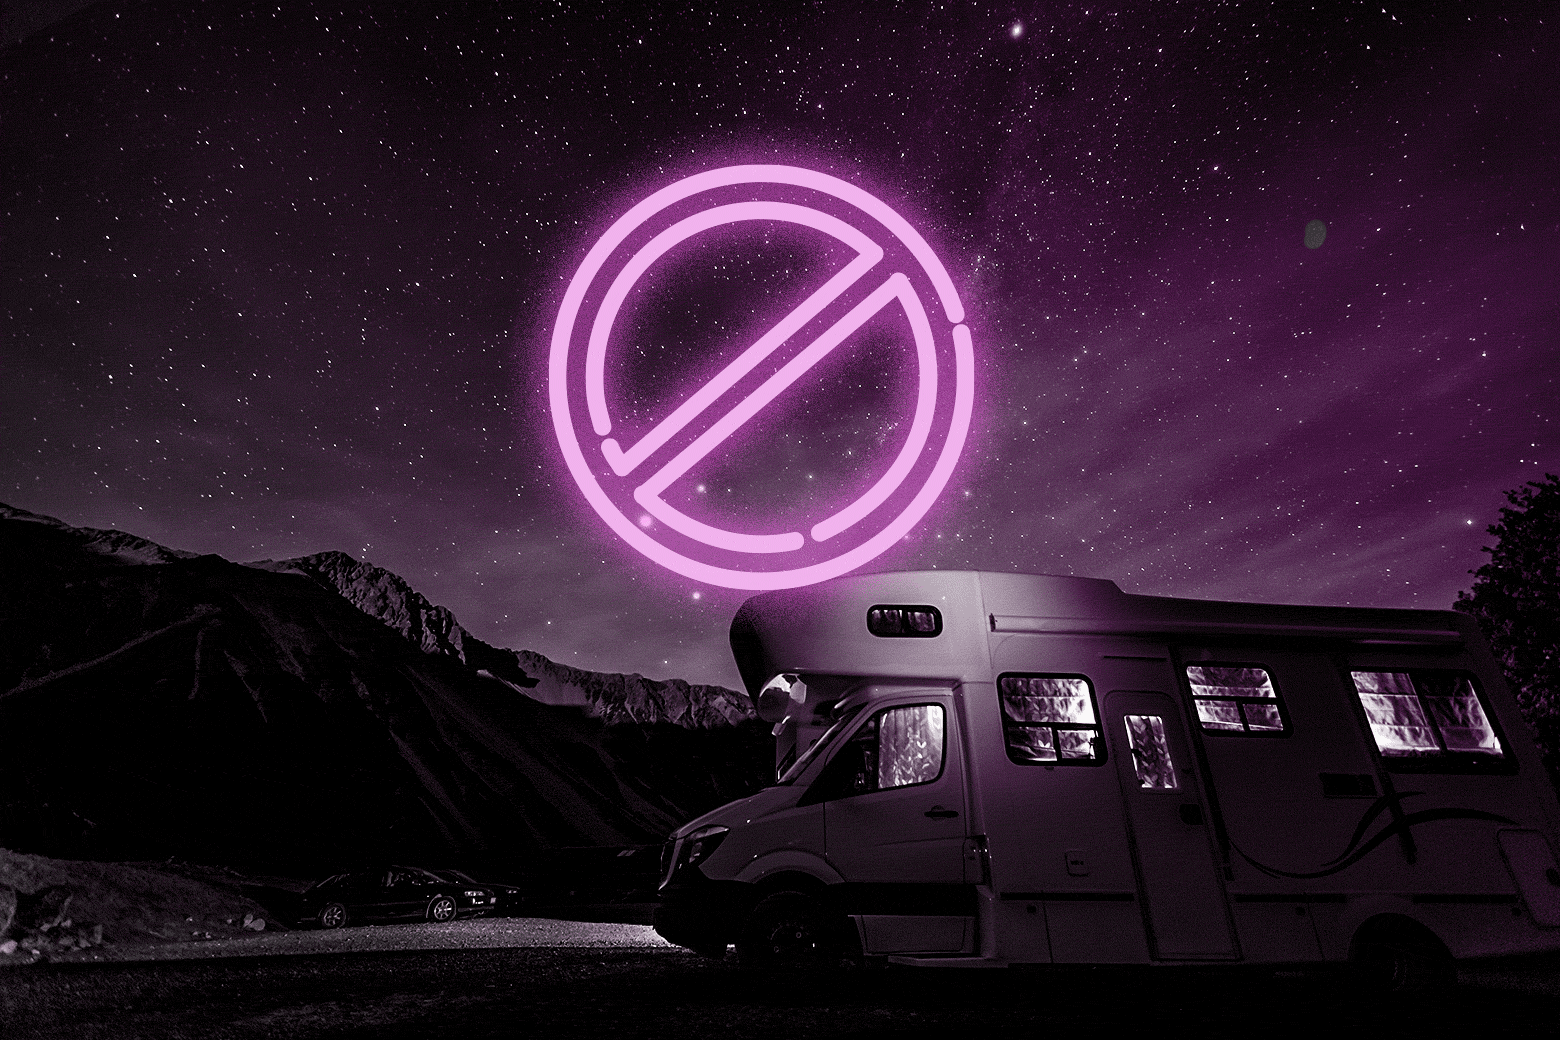 An RV under the stars with a neon no-entry sign.